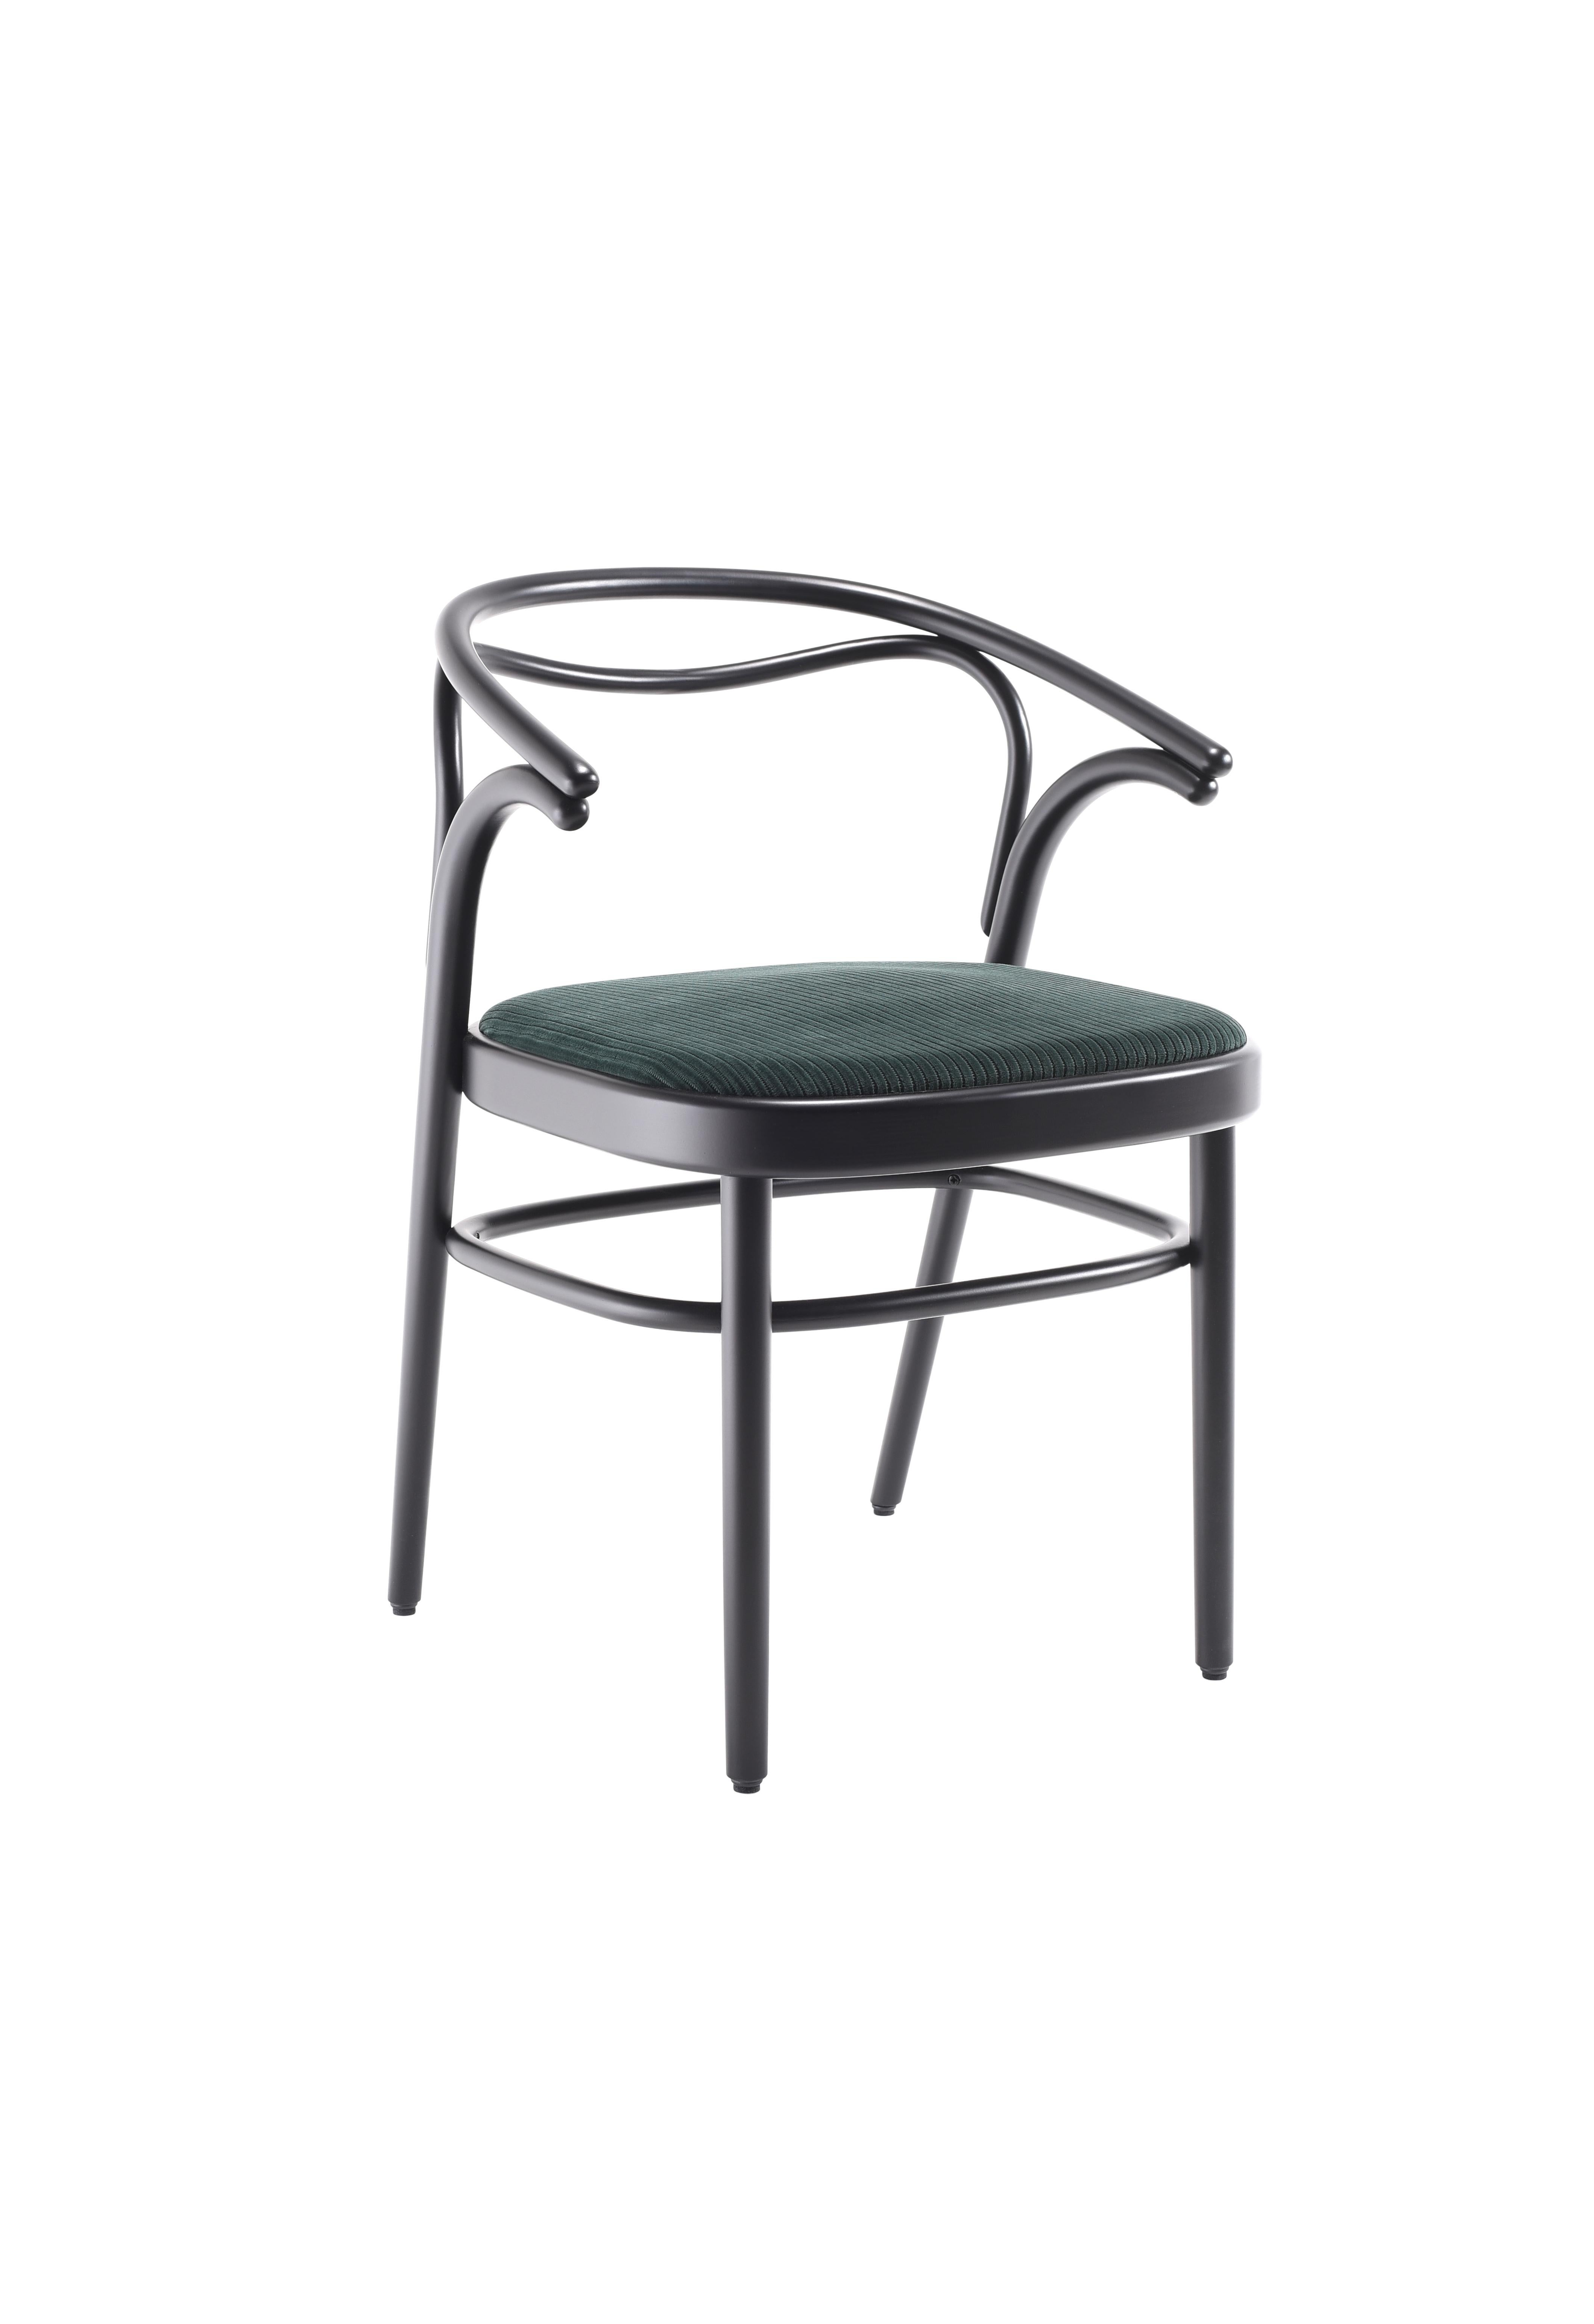 Gebrüder Thonet Vienna Beaulieu Armchair with Upholstered Seat by Philippe Nigro For Sale 6